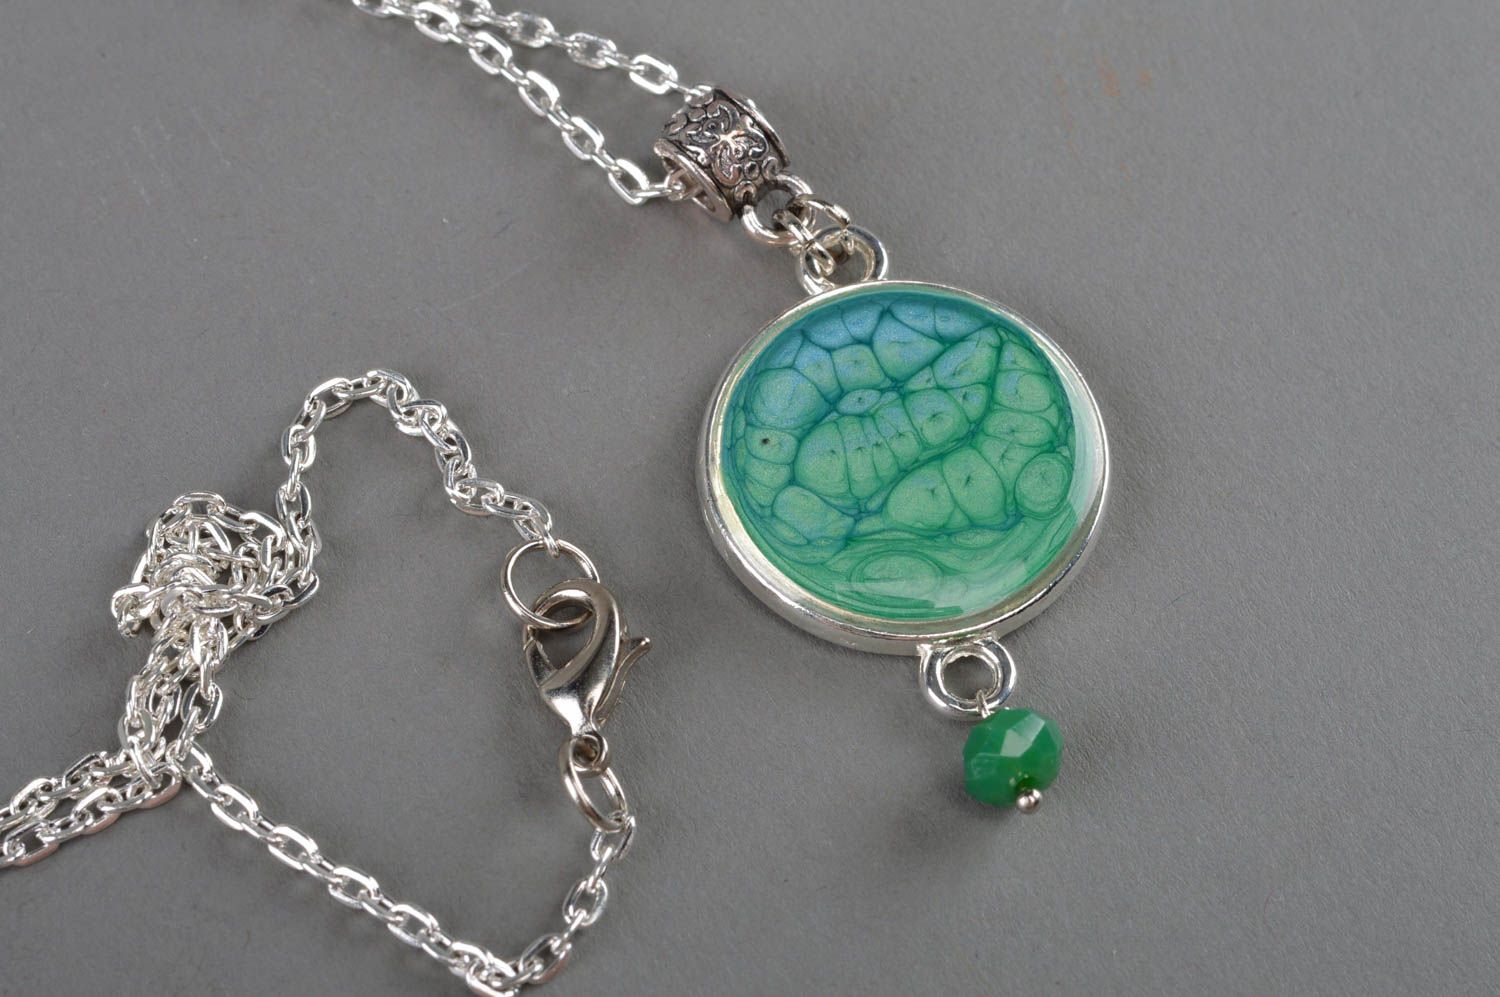 Handmade green round decoupage pendant necklace in jewelry resin on metal chain photo 2